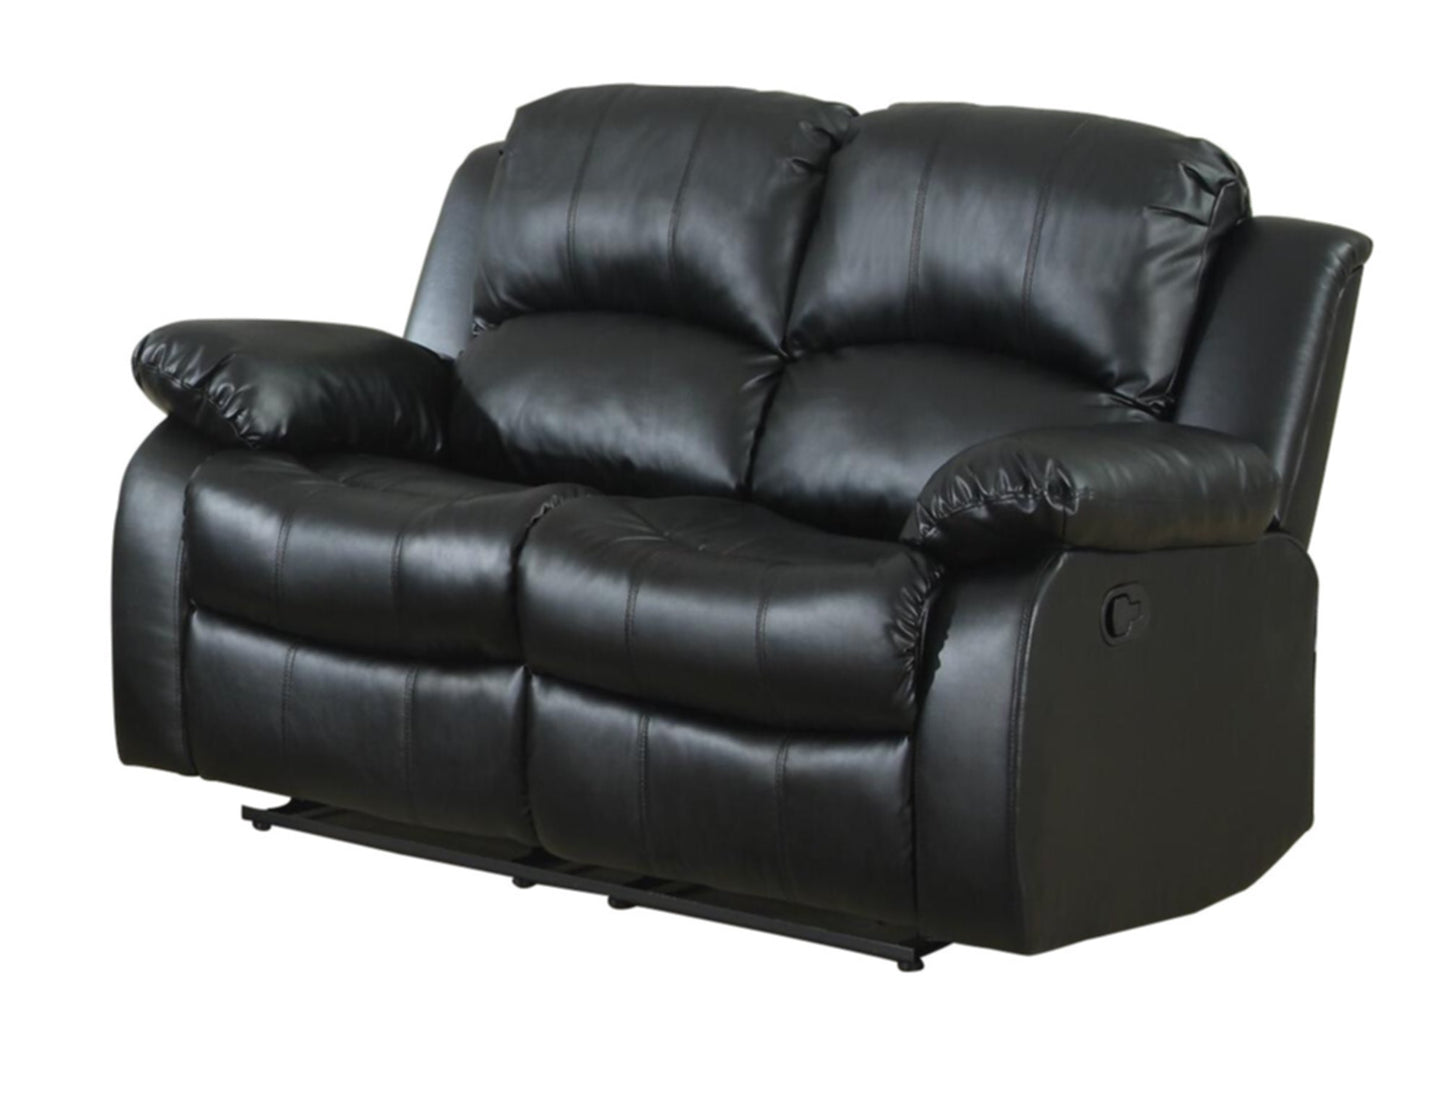 Homelegance Cranley 2PC Set Double Reclining Love Seat & Recliner Chair in Leather - Black